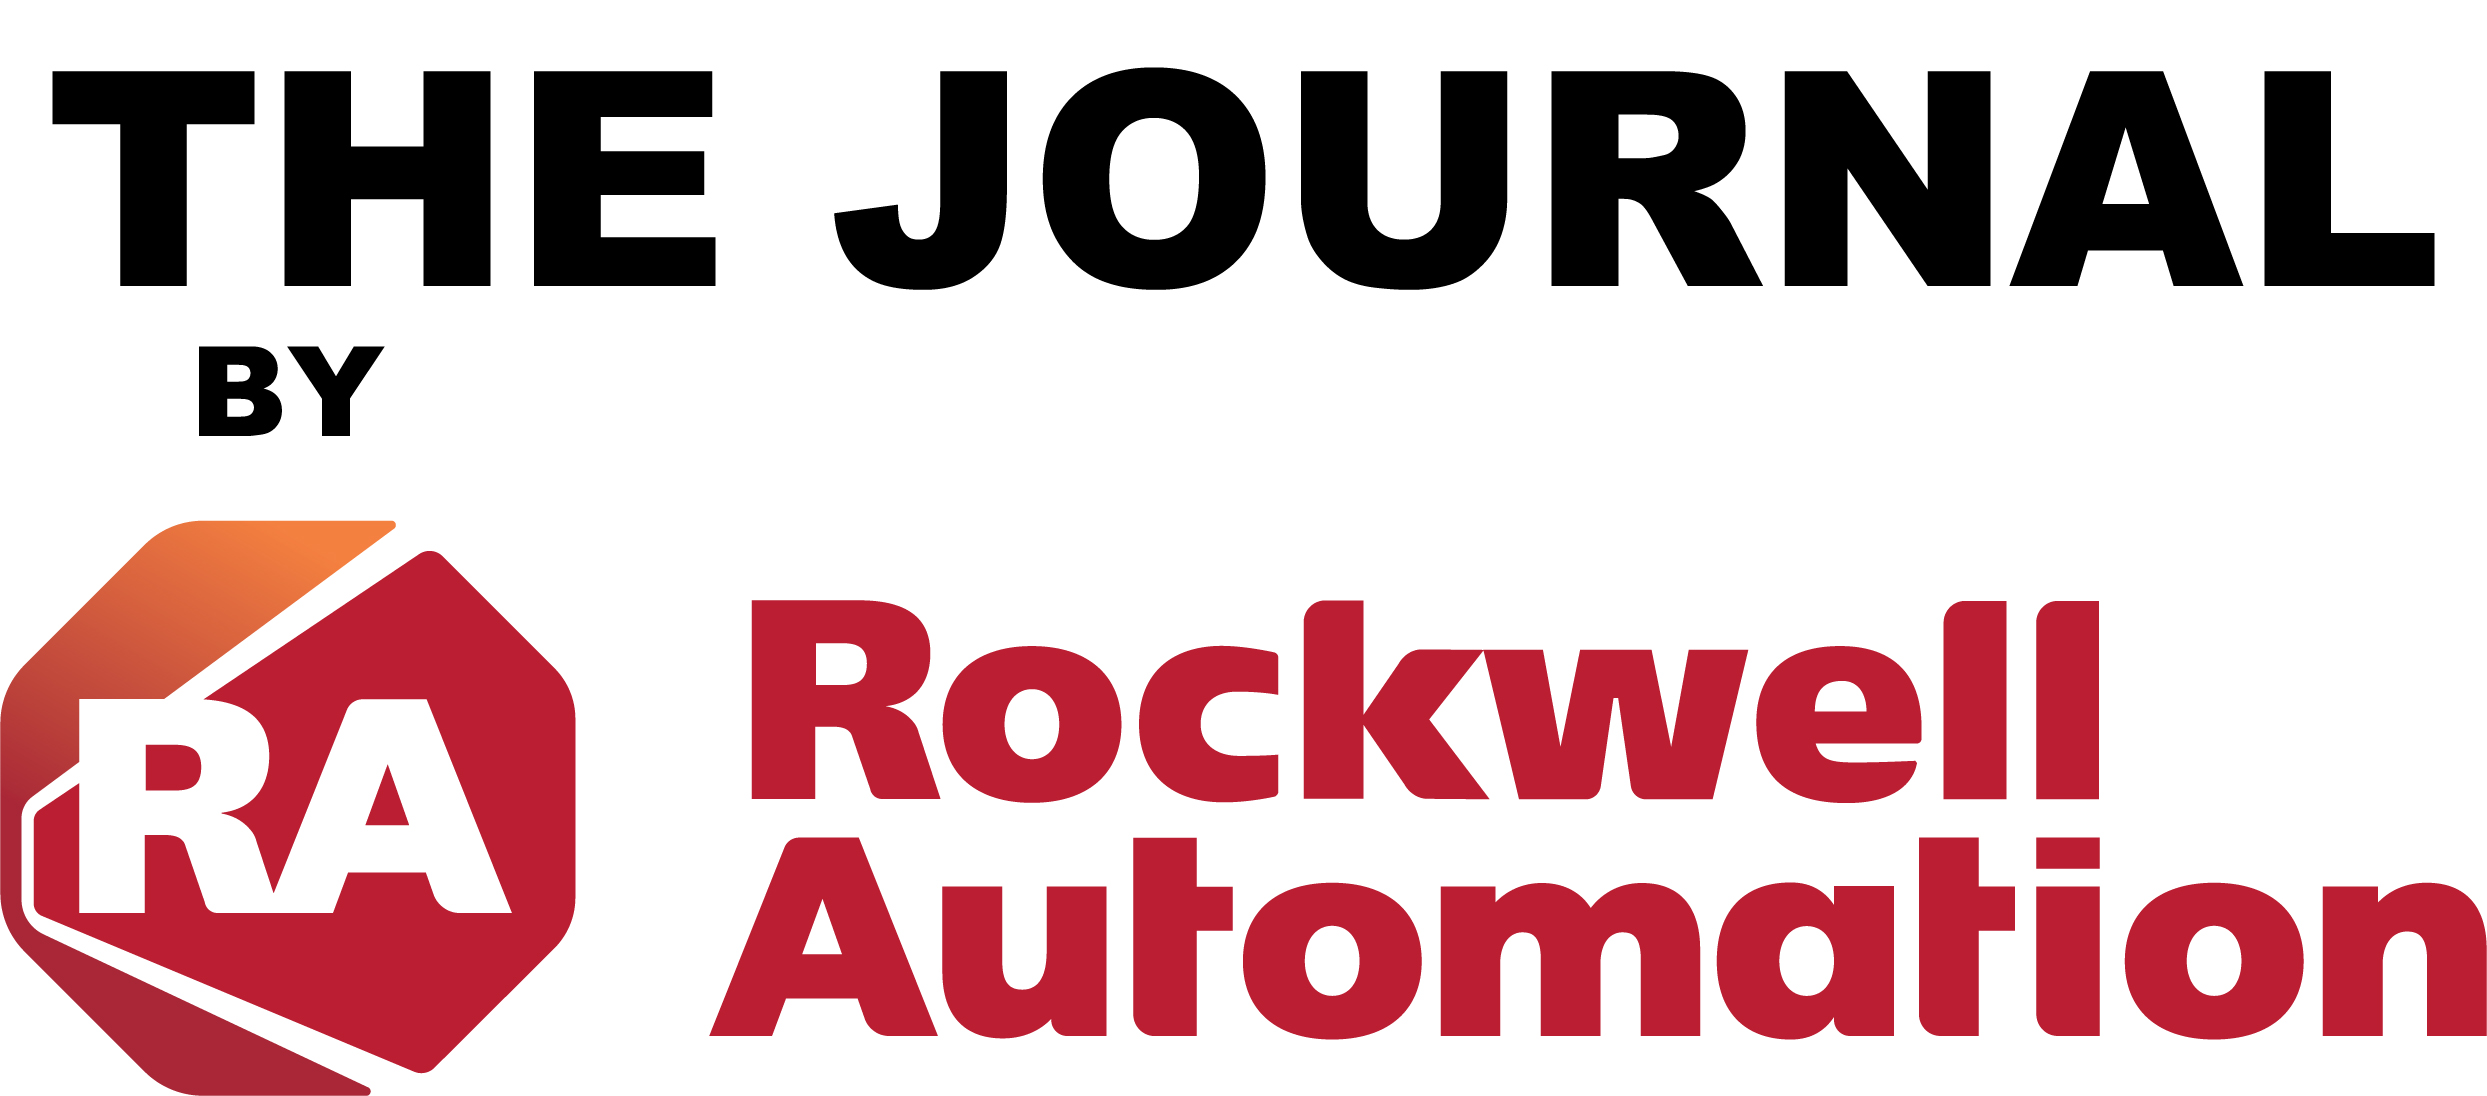 The Journal by Rockwell Automation